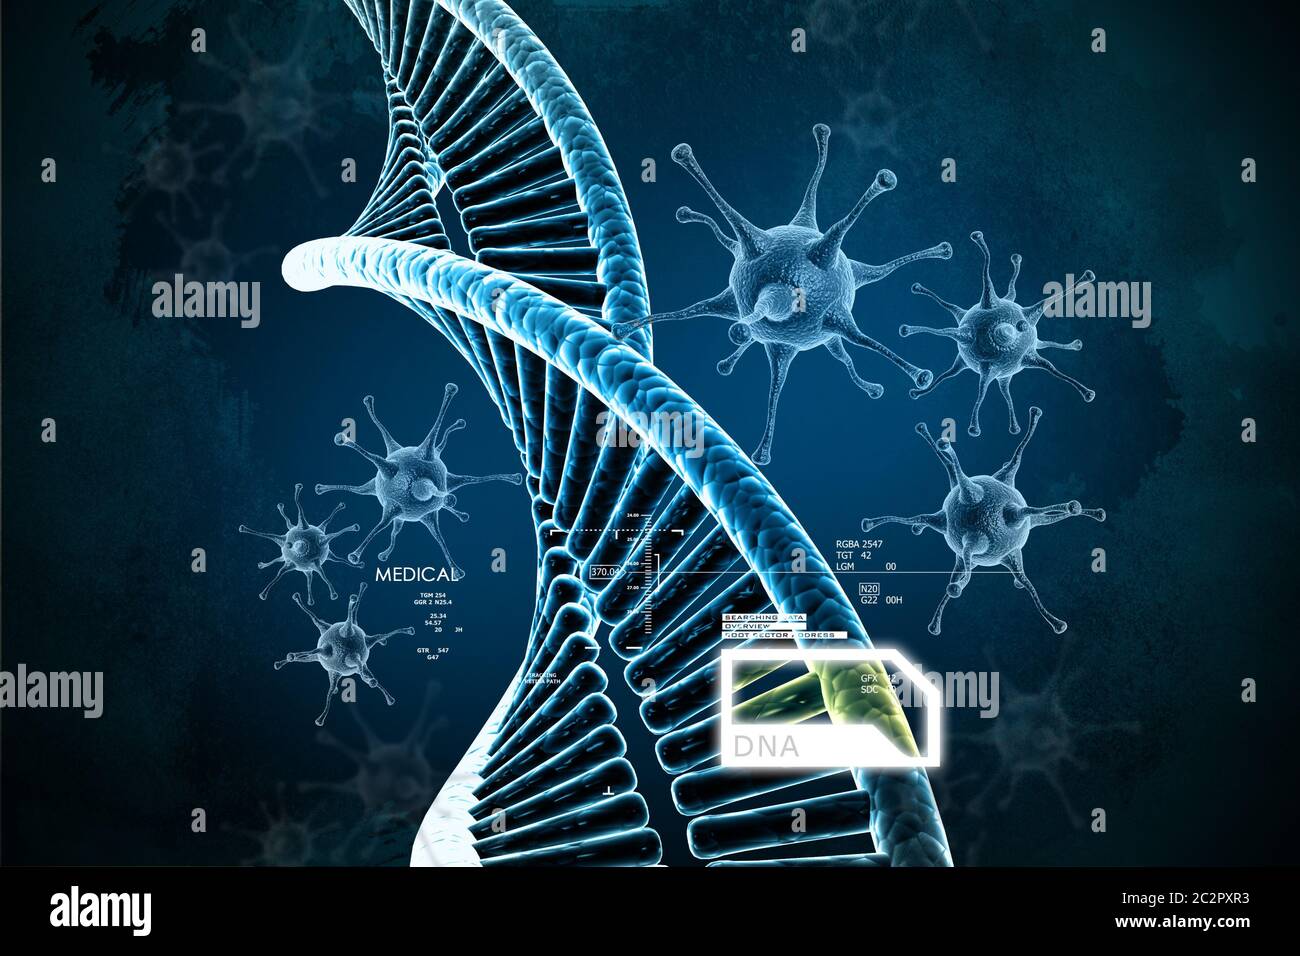 model of twisted chrome DNA chain Stock Photo